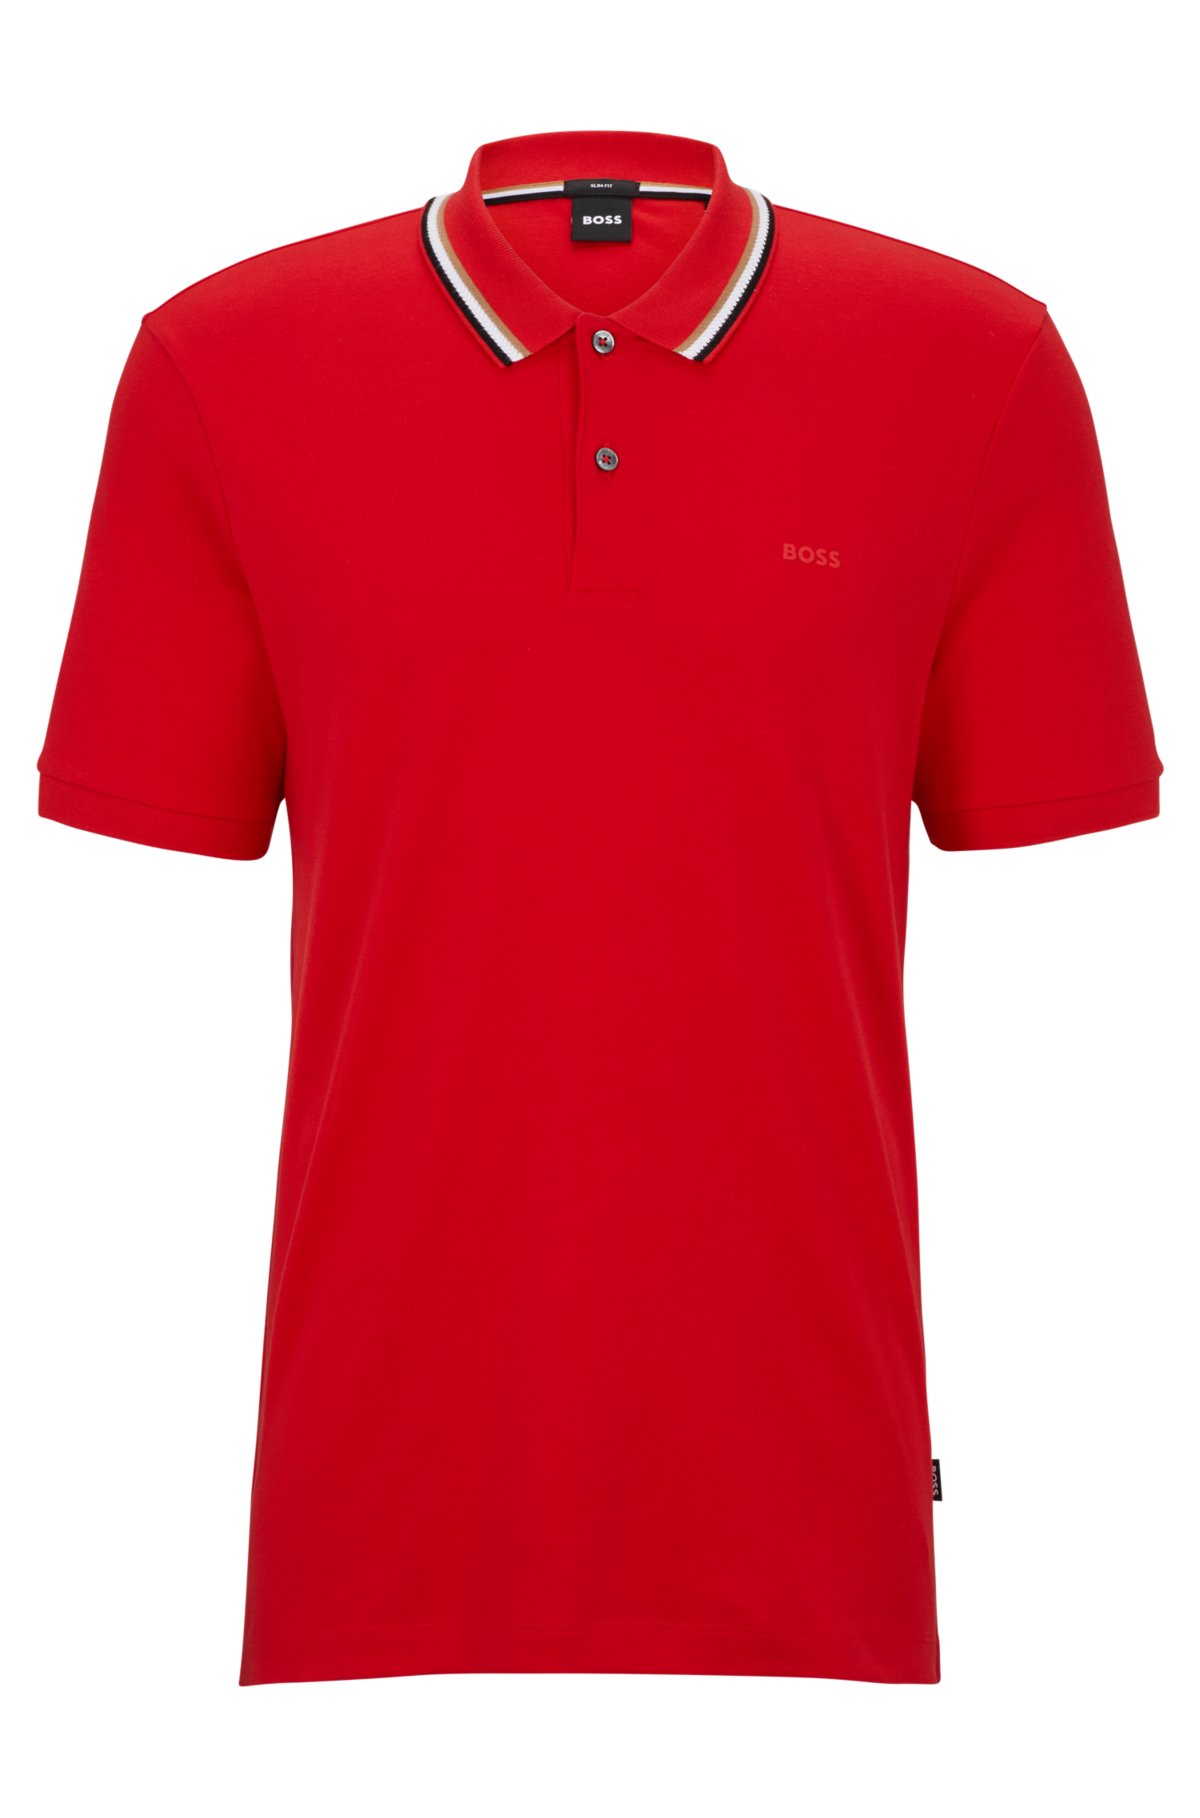 LACOSTE LIVE! Size 6 Large Red Polo Shirt Mens 100% Cotton Short Sleeve  Golf